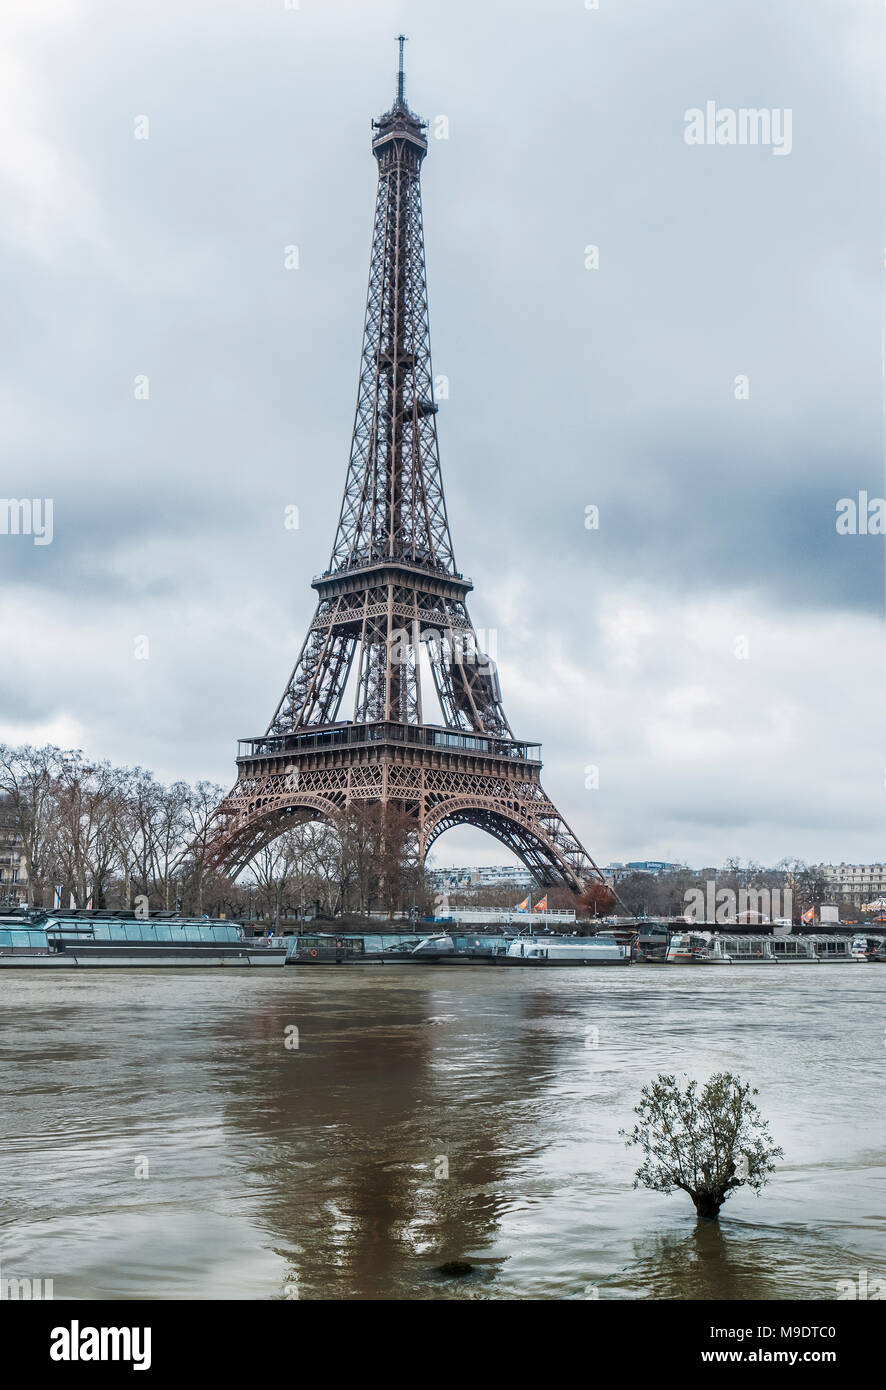 Eiffel Tower during Paris floods of winter 2018 towering above a small tree peeping out of the swirling waters of the high river Seine Stock Photo